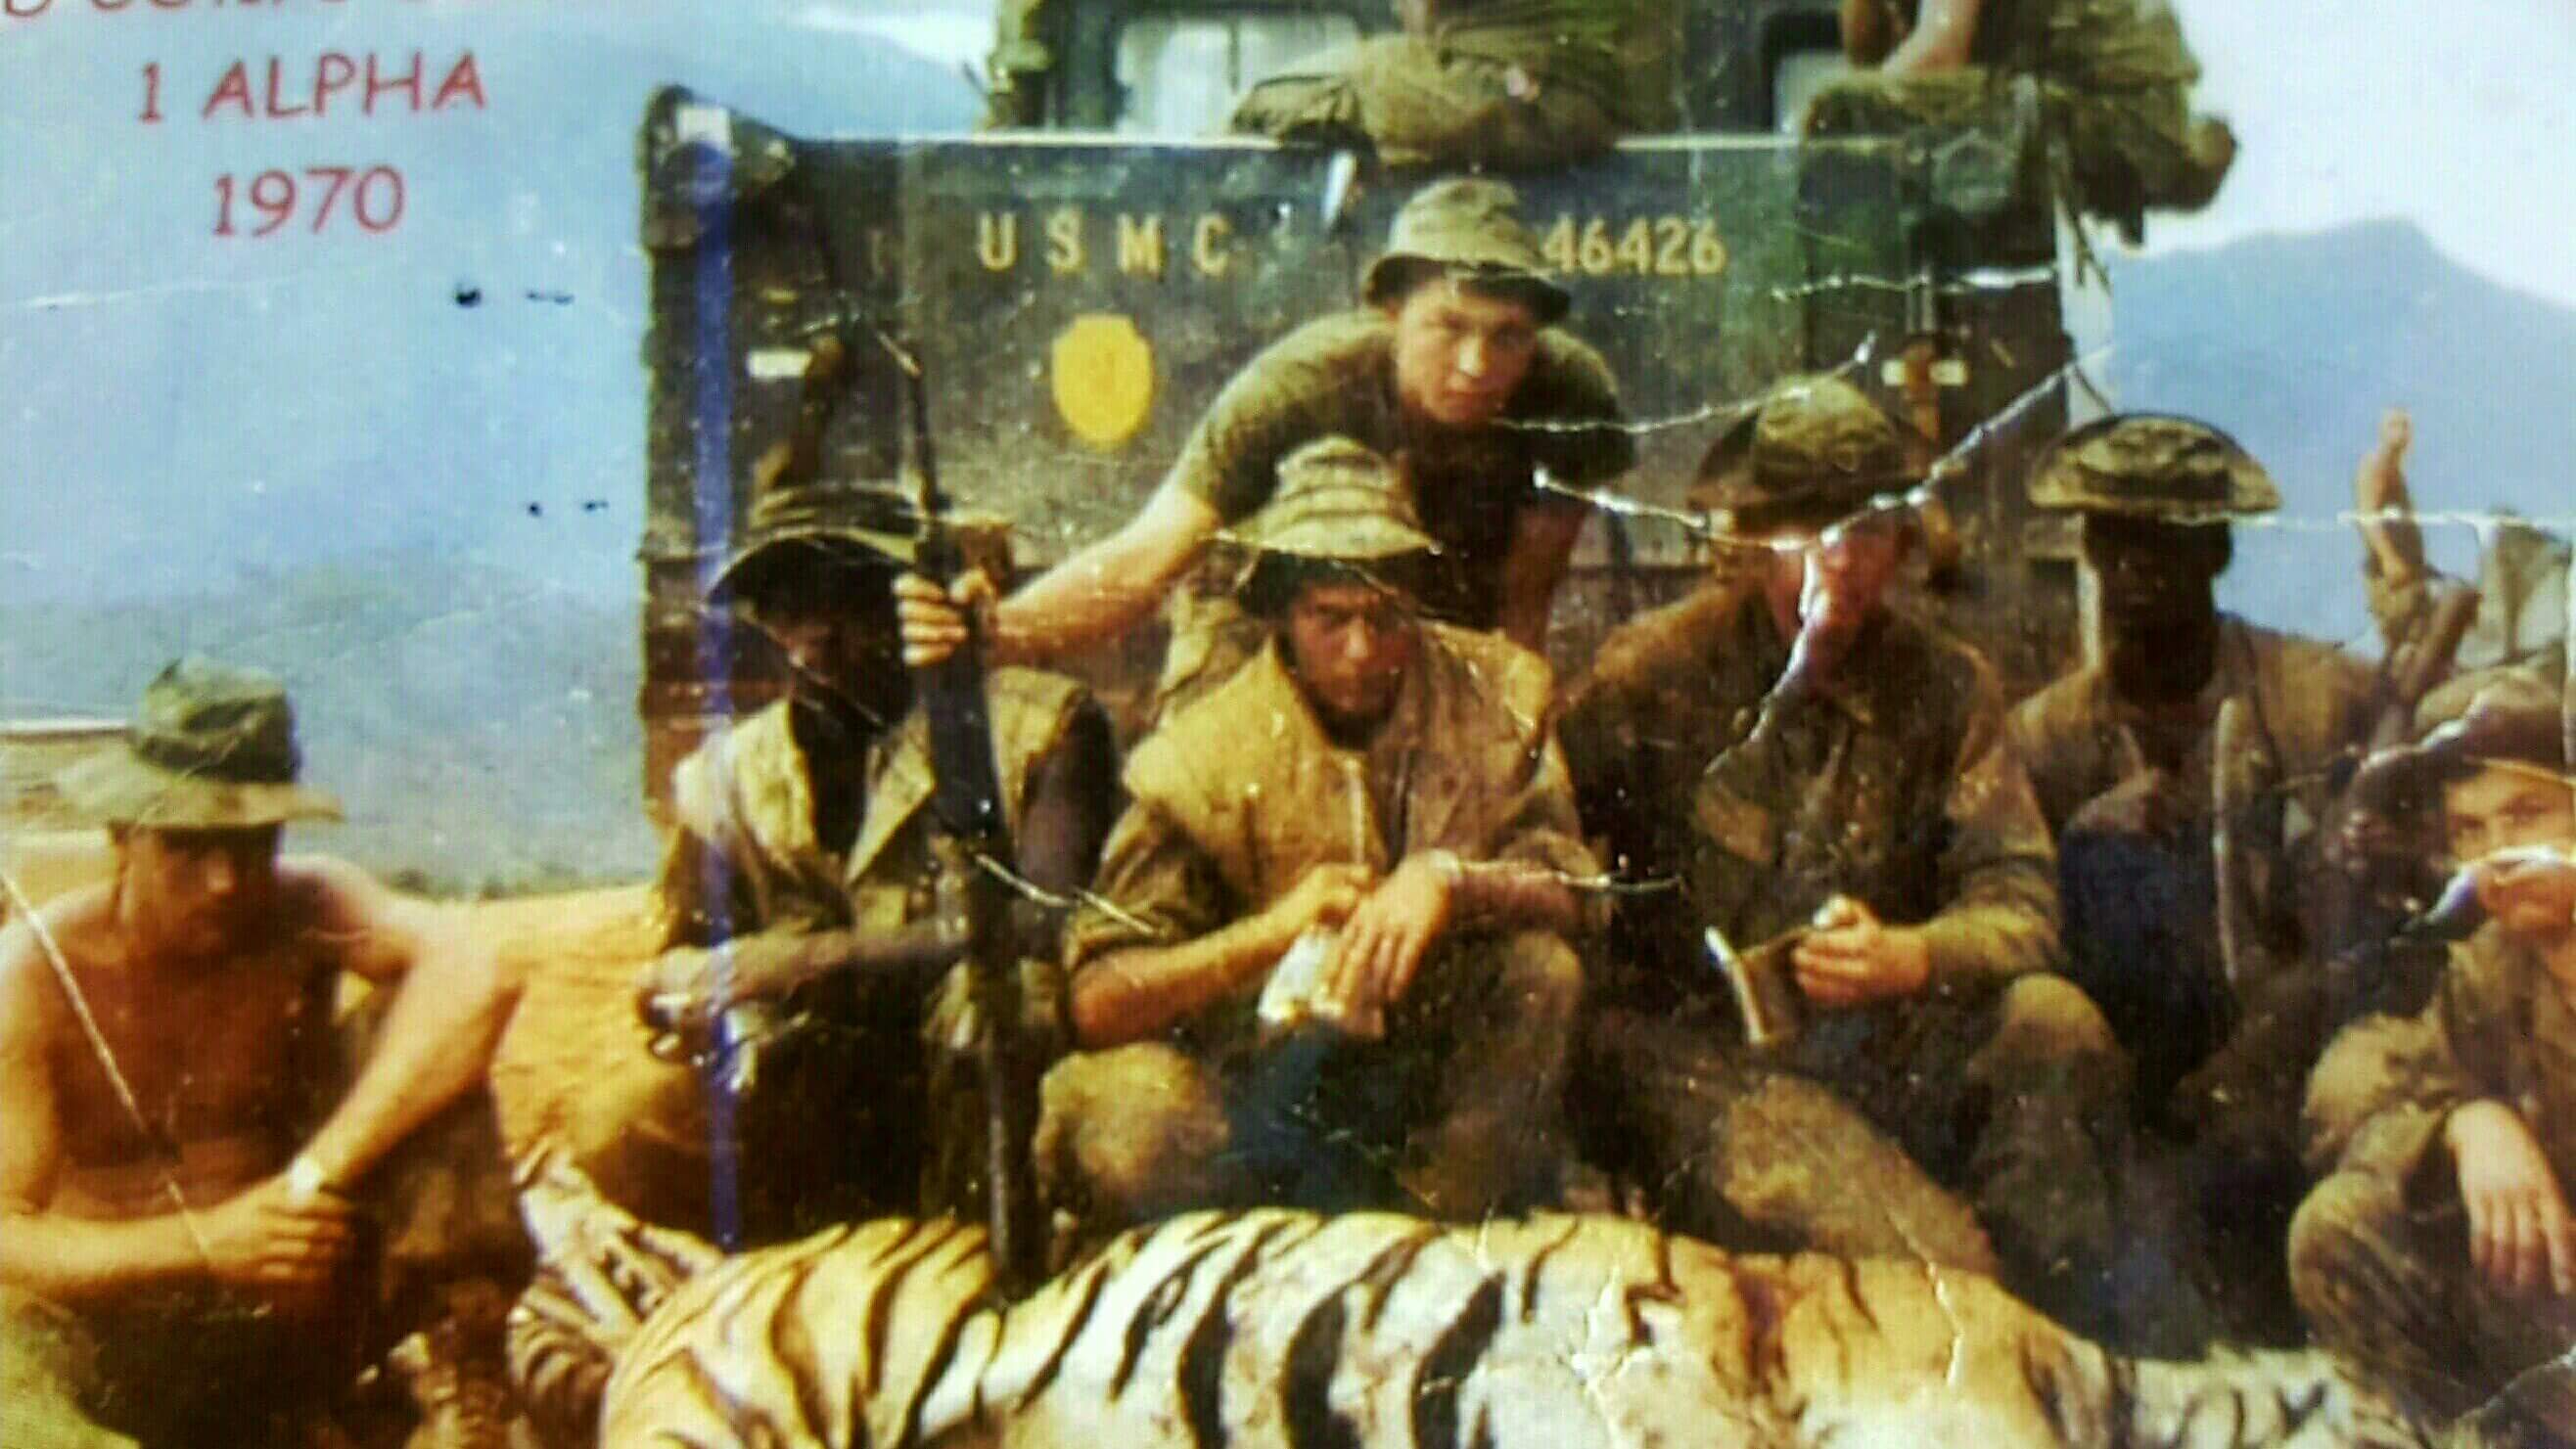 Soldiers looking tough, posing with the carcass of a tiger.